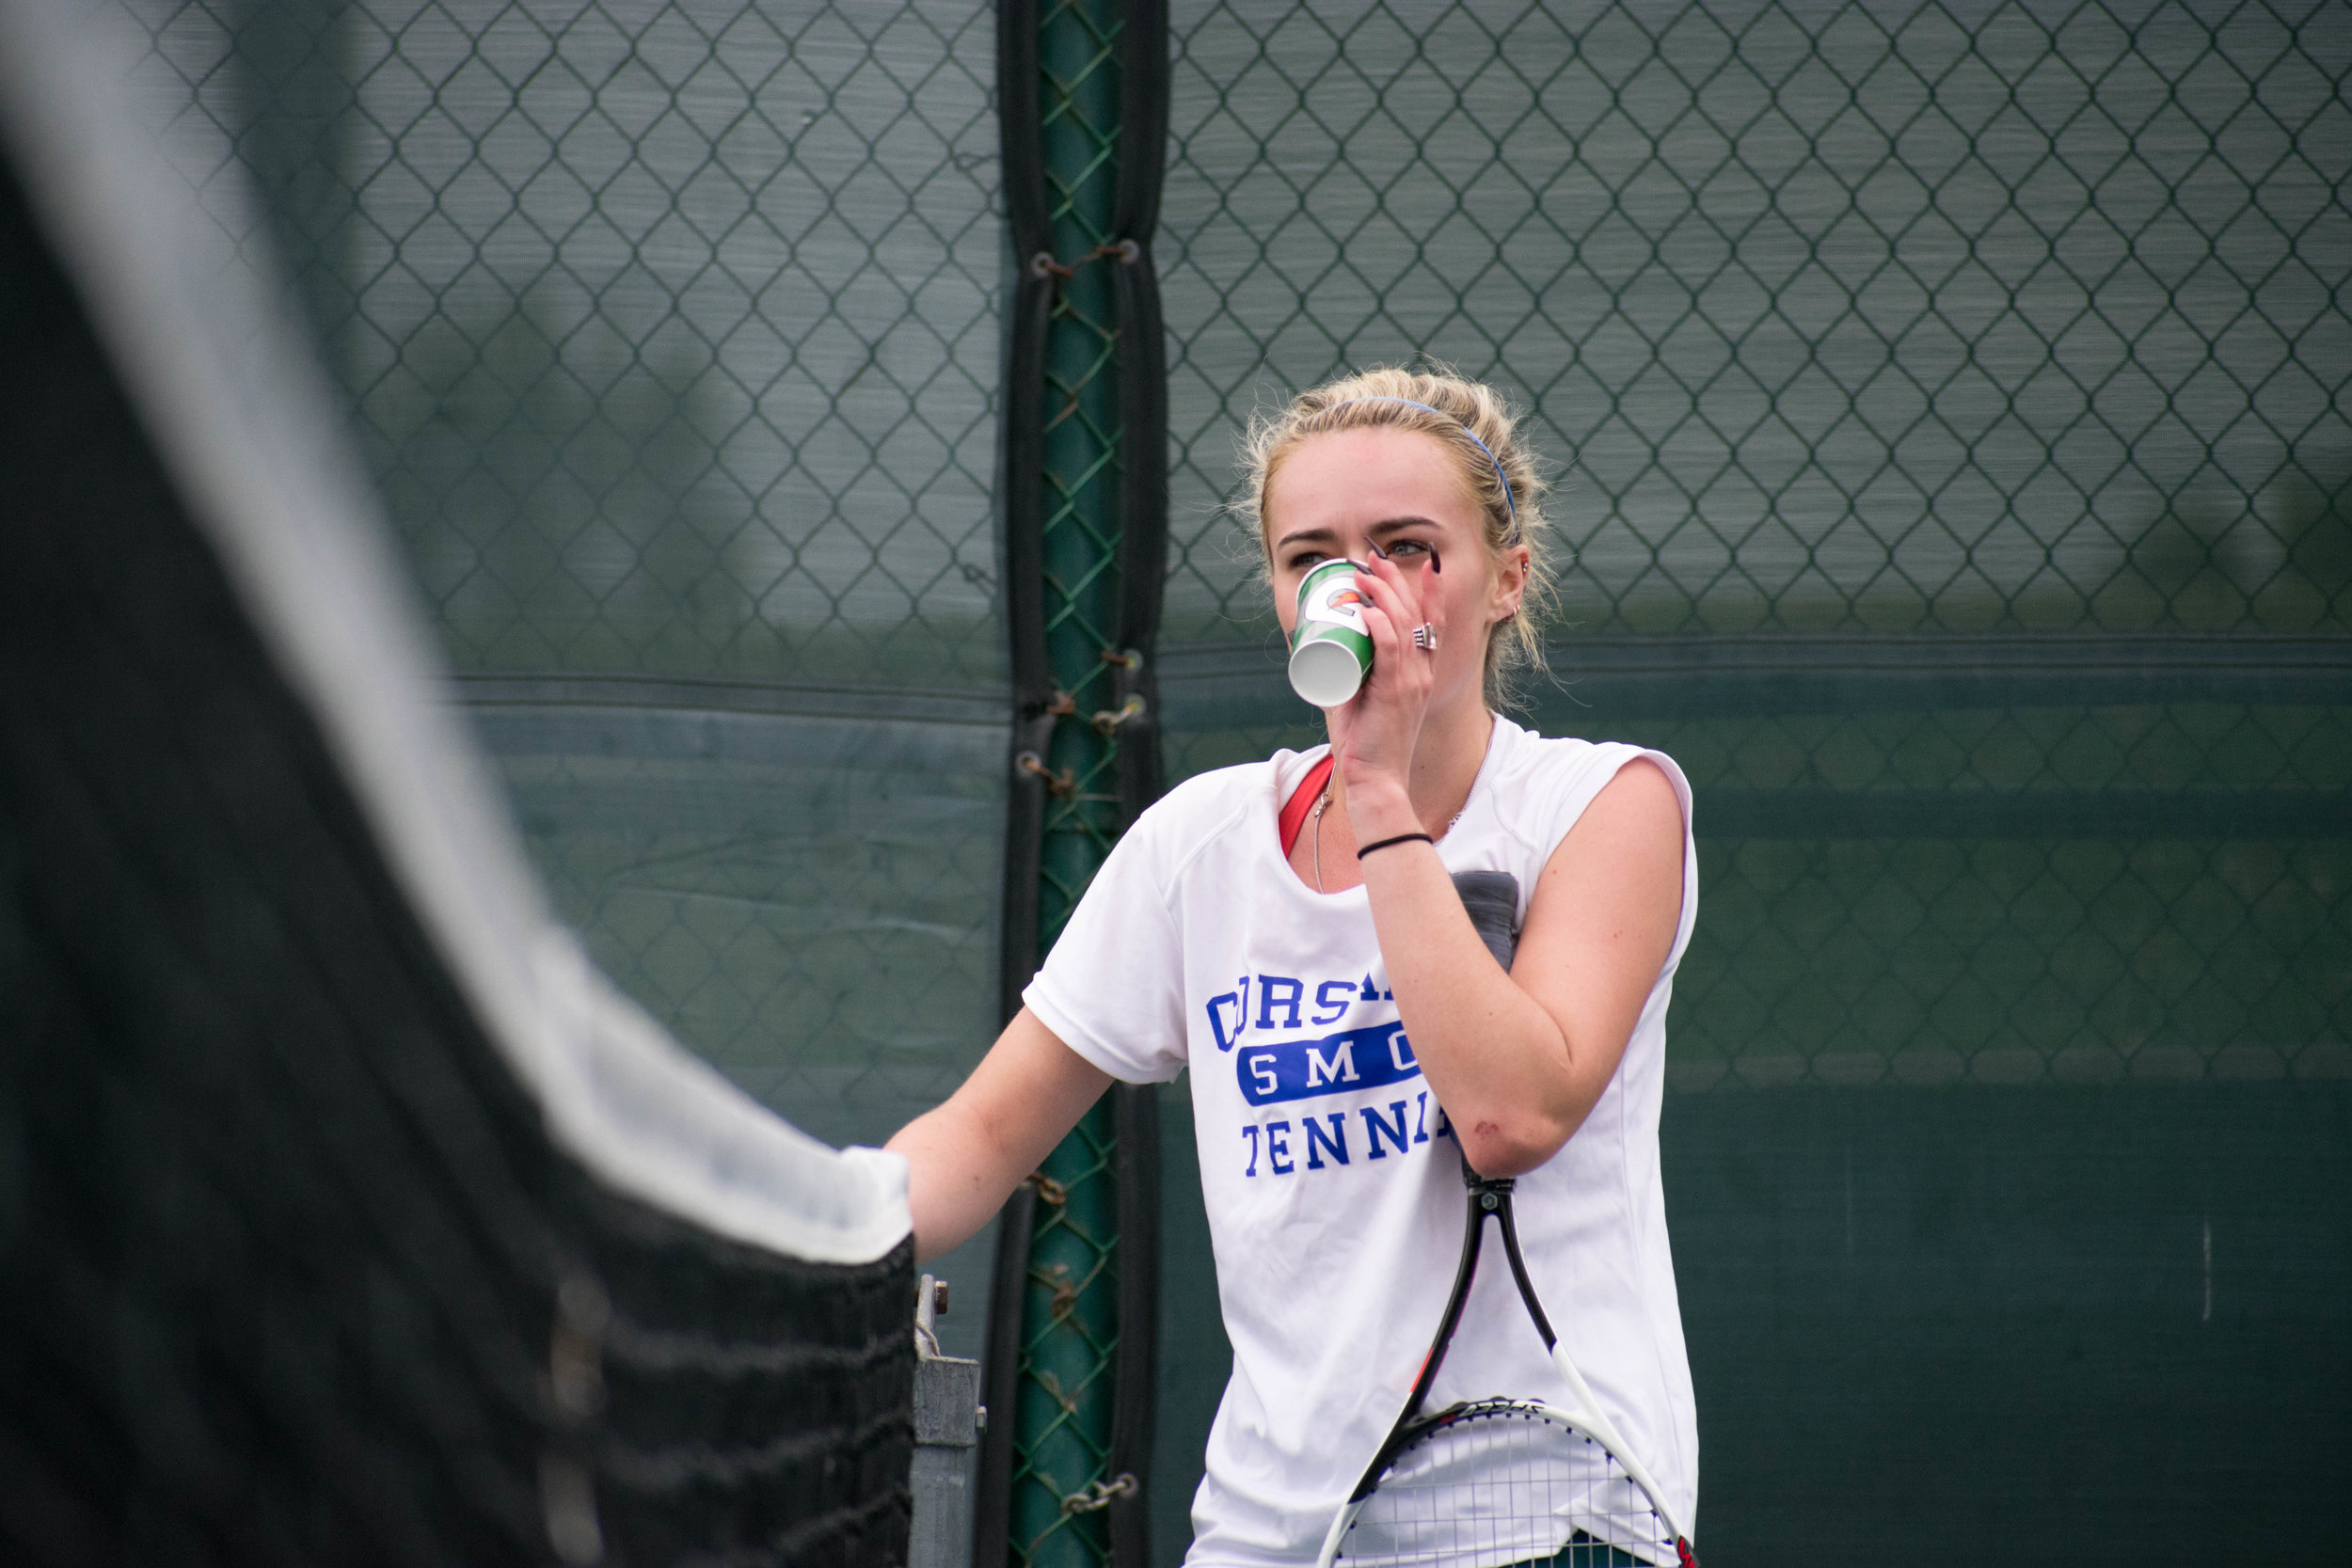  Santa Monica College Corsair sophomore Abby Mullins (#1, singles) takes a break to drink water during a singles tennis match on Tuesday, March 20 against the Glendale College Vaqueros at the Ocean View Park Tennis Courts in Santa Monica, California.